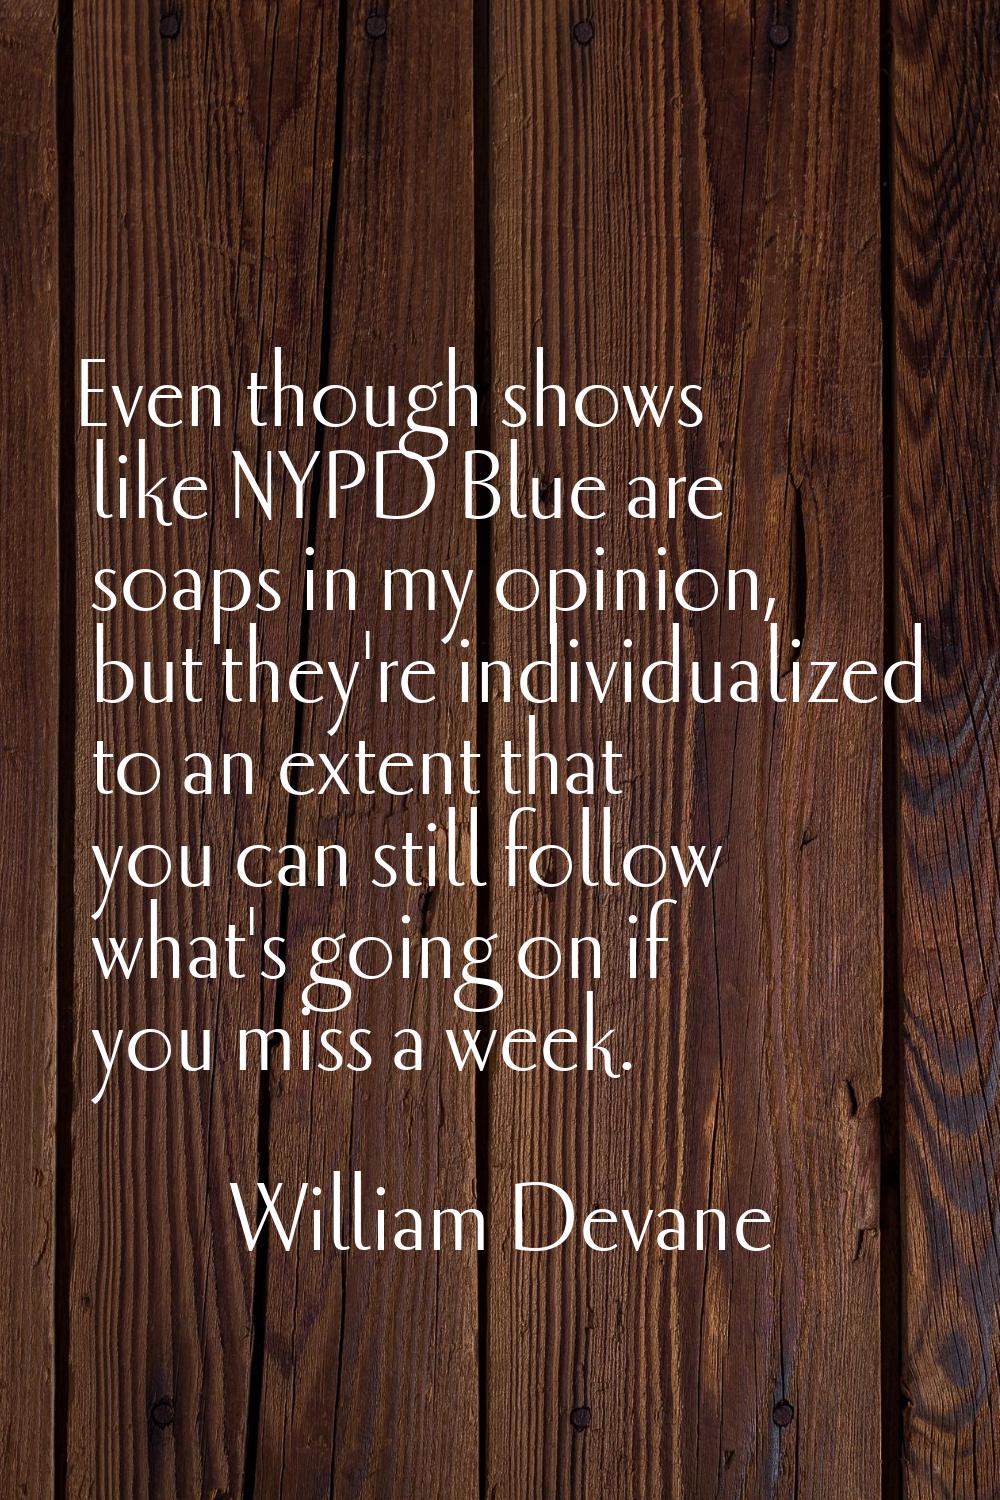 Even though shows like NYPD Blue are soaps in my opinion, but they're individualized to an extent t